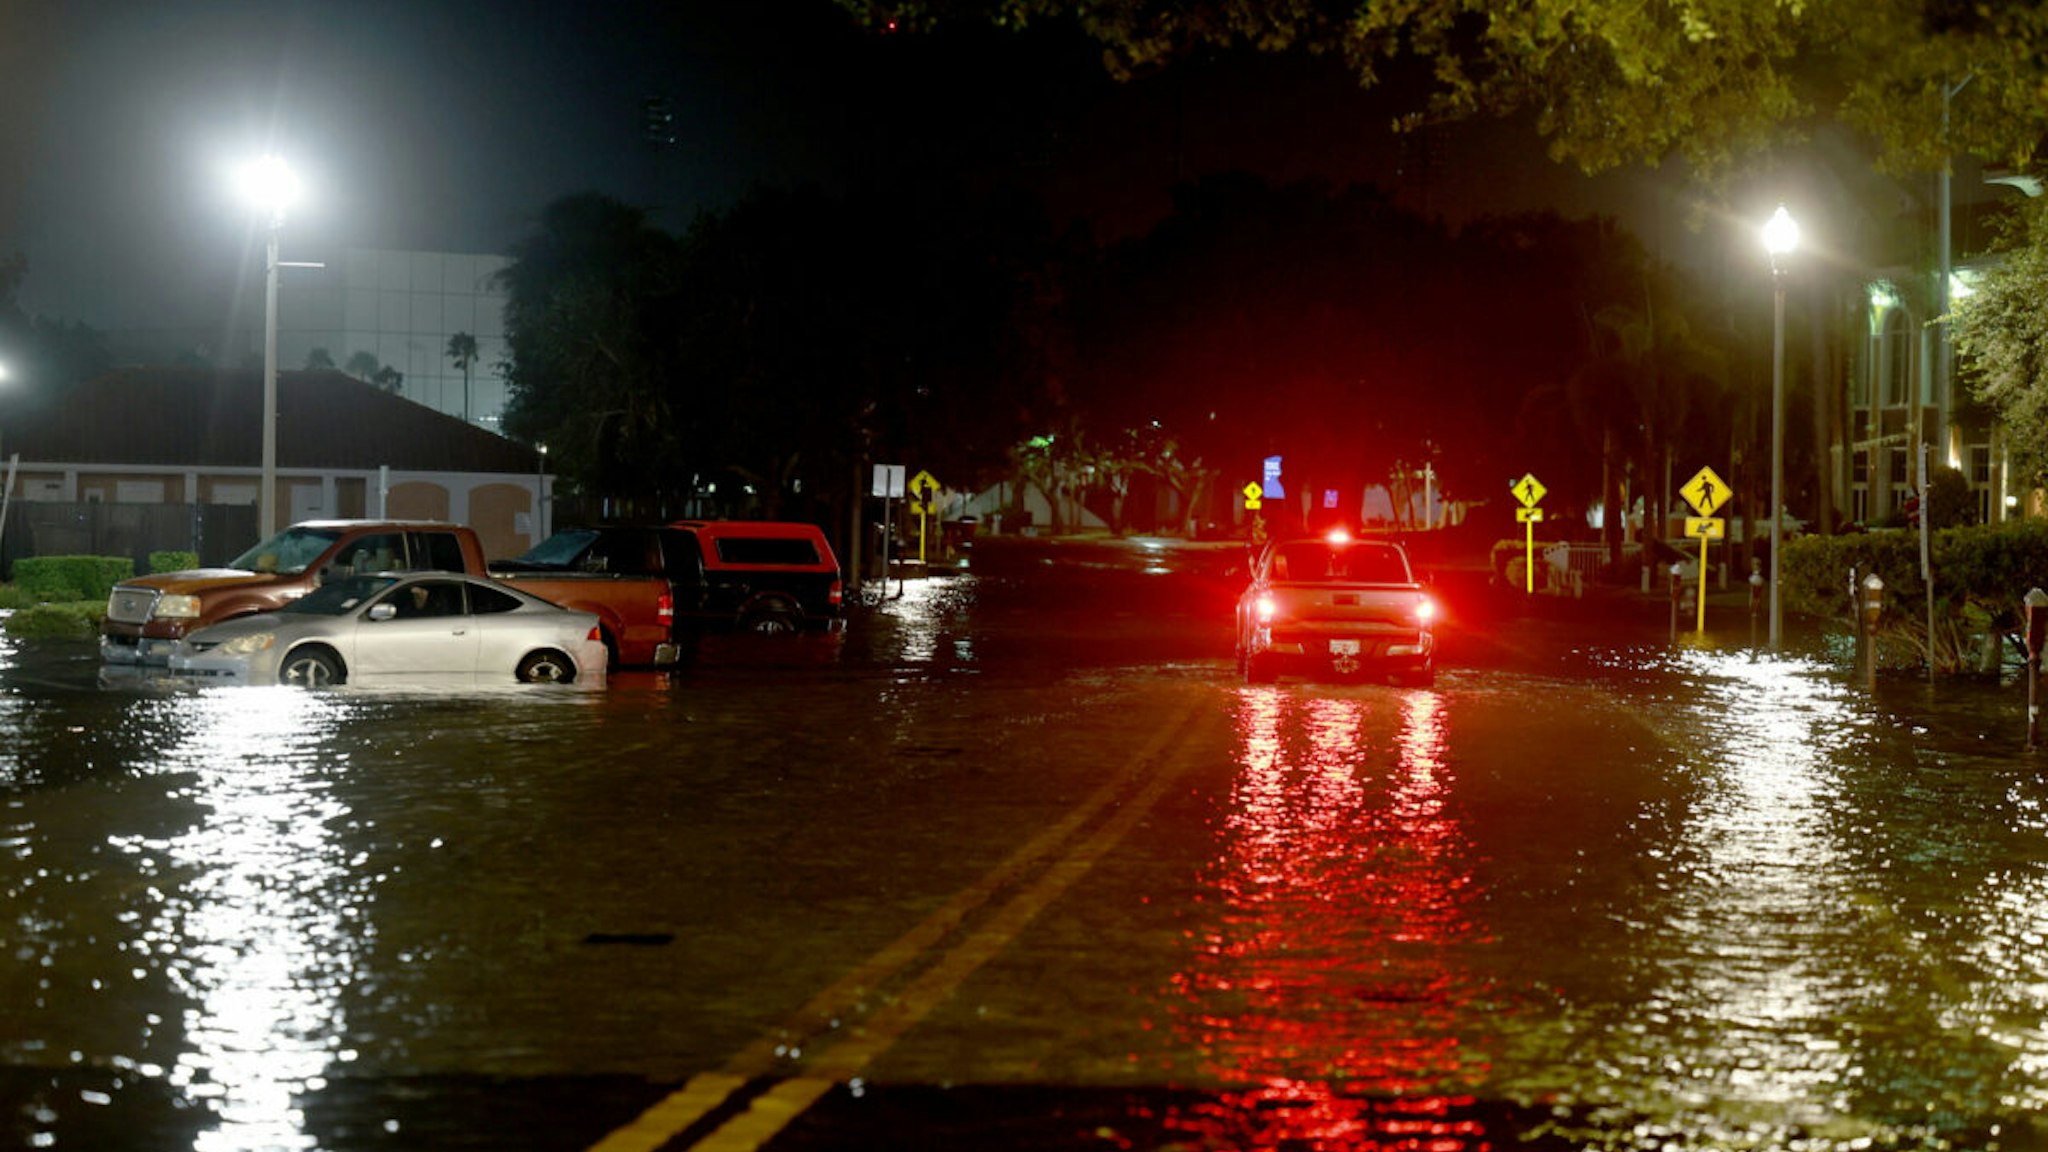 A vehicle drives through flood waters caused by Hurricane Idalia passing offshore on August 30, 2023 in St. Petersburg, Florida. Hurricane Idalia is hitting the Big Bend area of Florida.